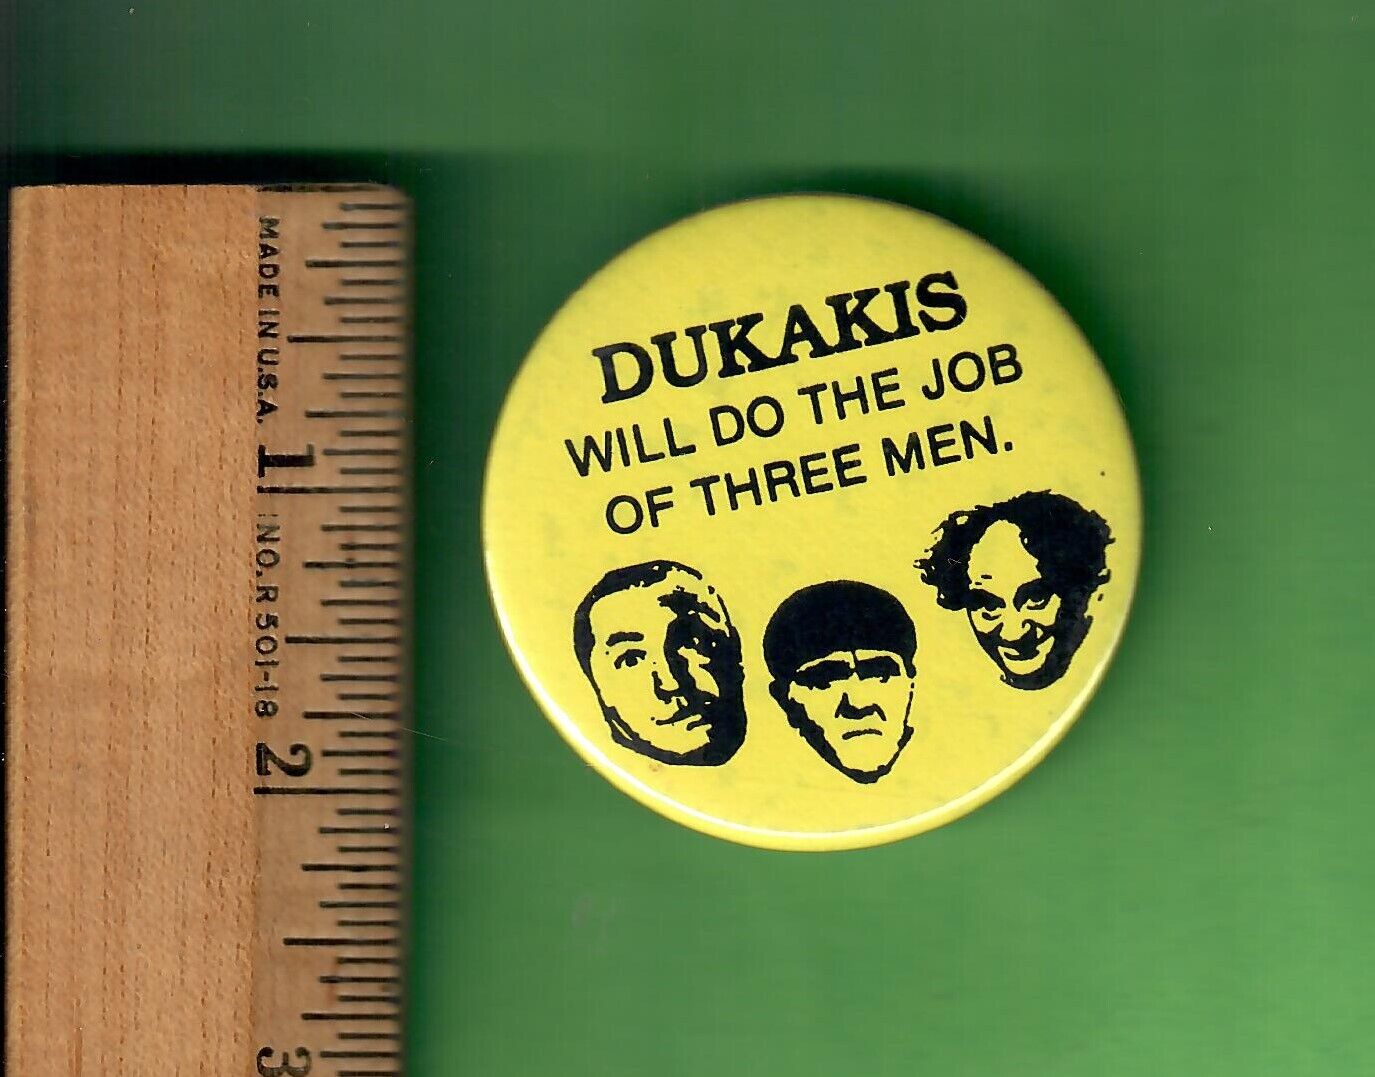 1988 VINTAGE ANTI-MICHAEL DUKAKIS PRESIDENTIAL CAMPAIGN PIN 3 STOOGES - RARE